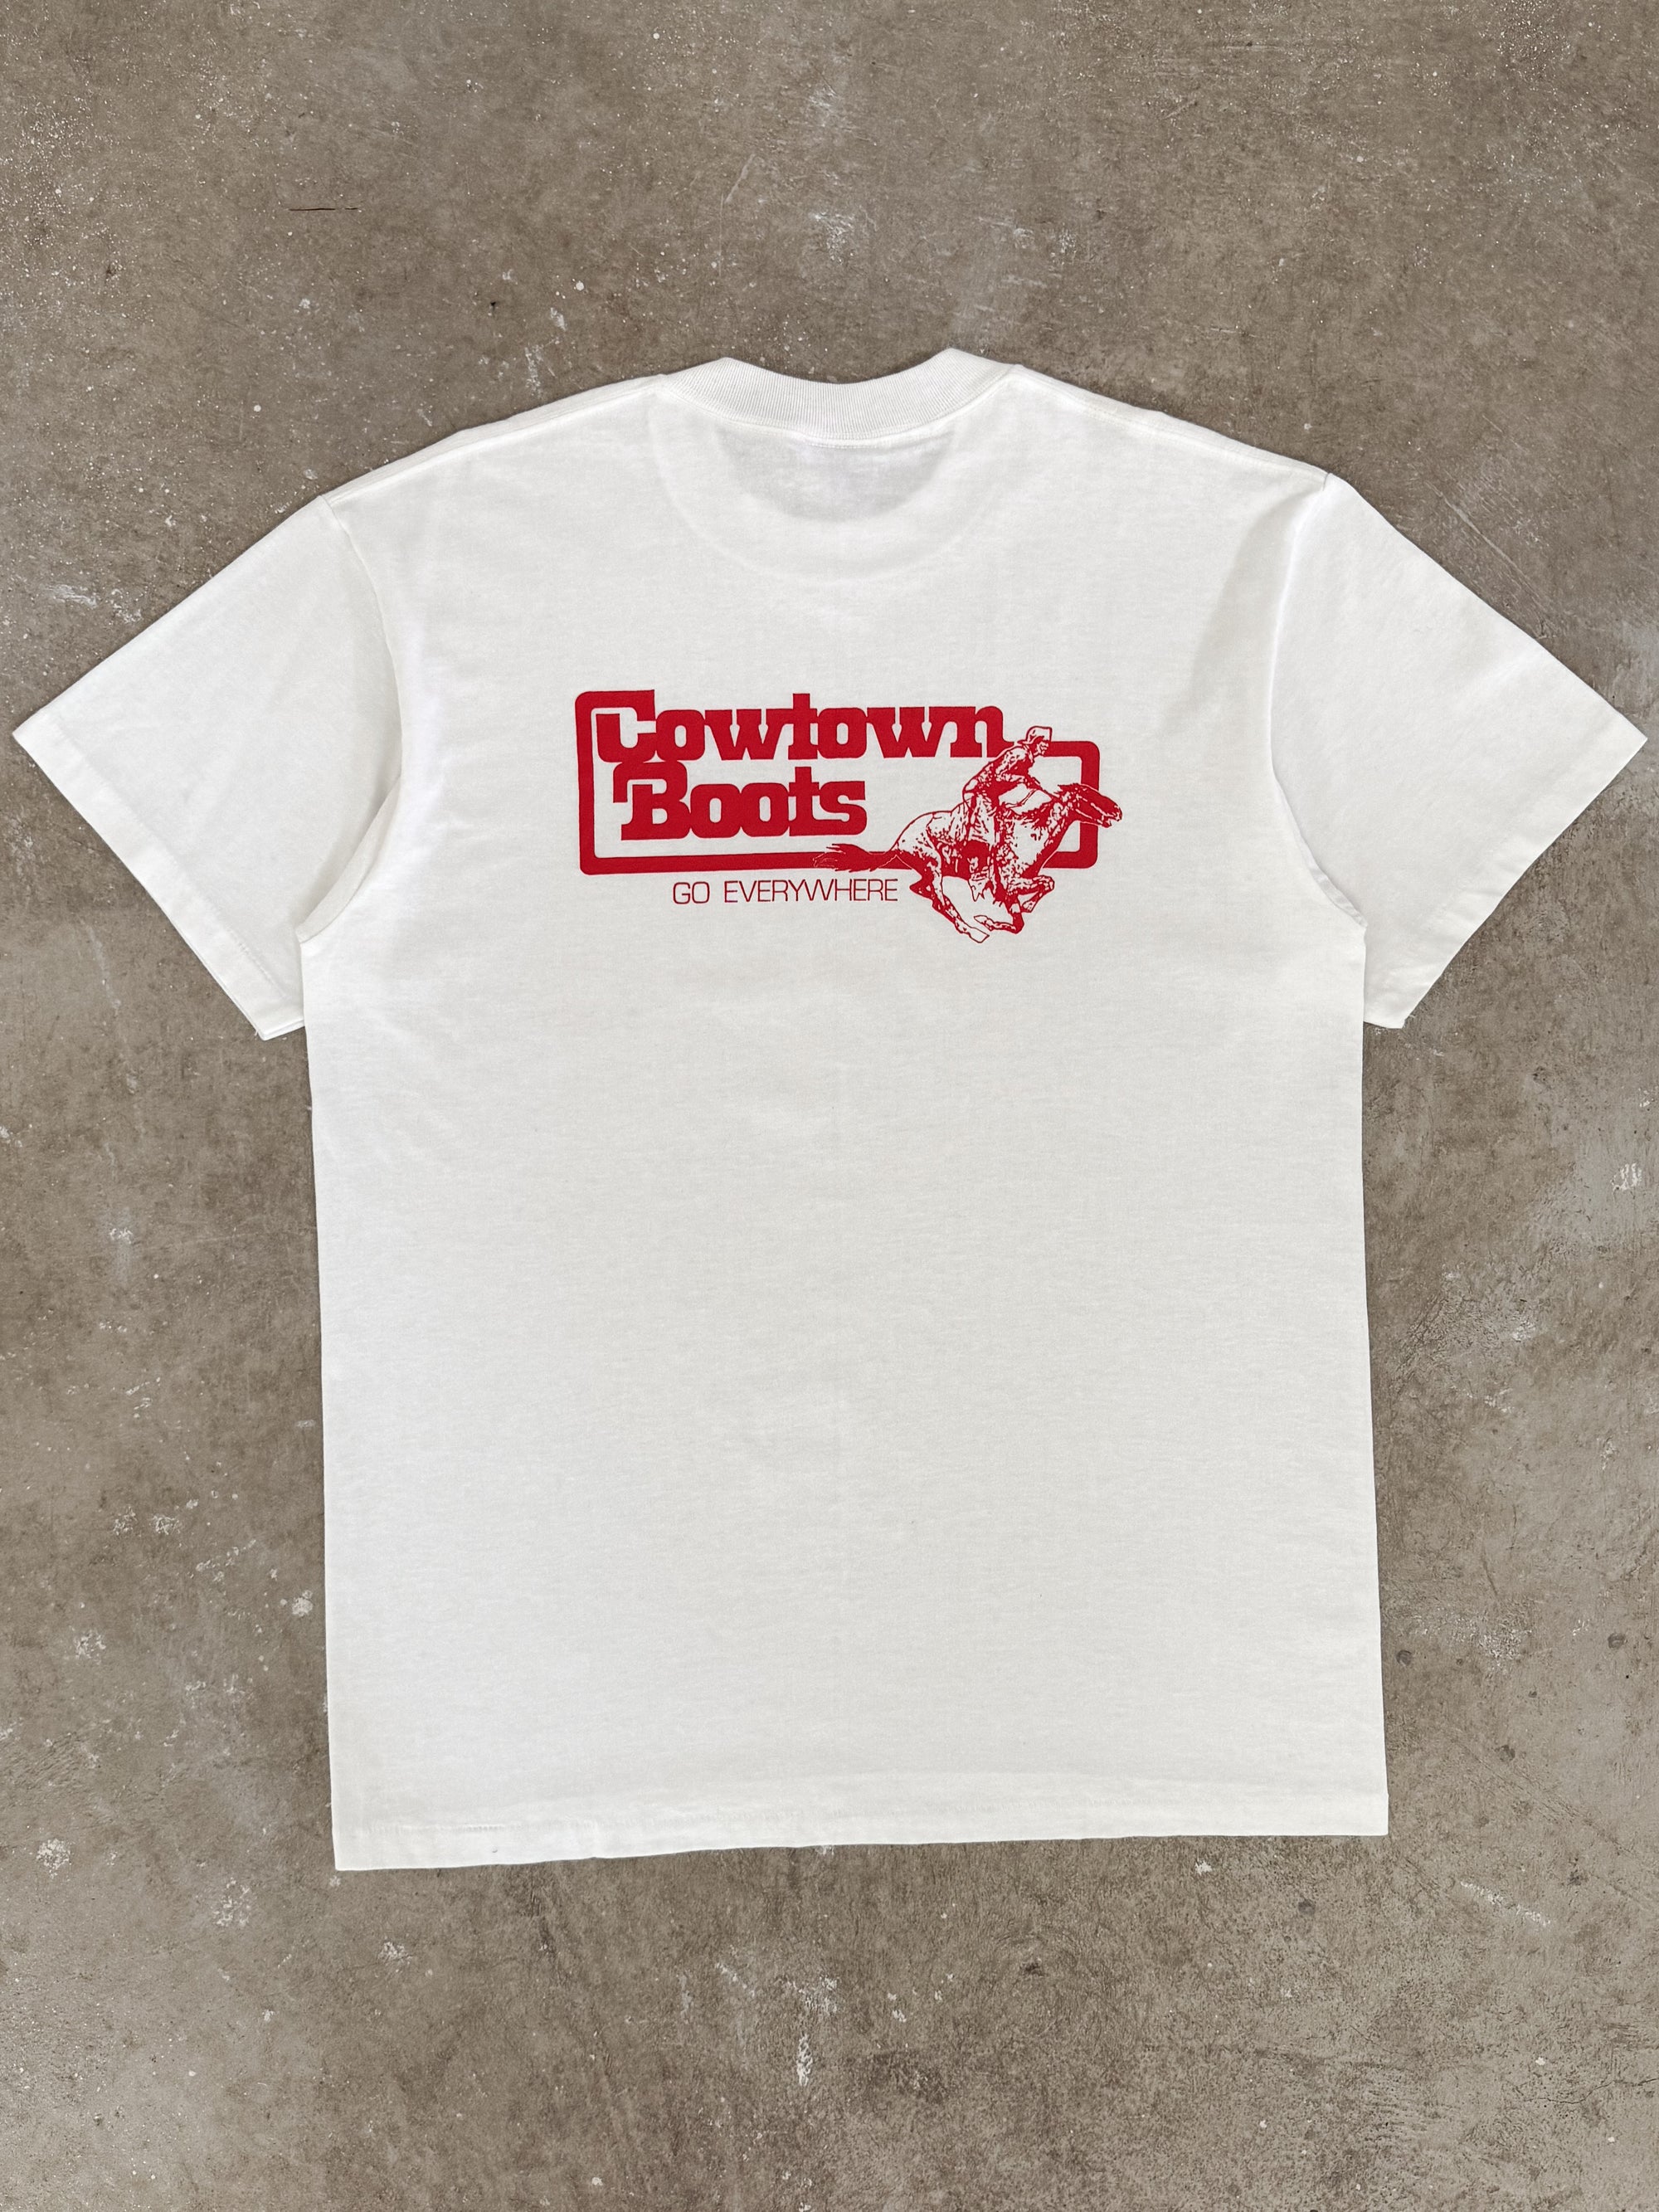 1990s "Cowtown Boots" Tee (L)